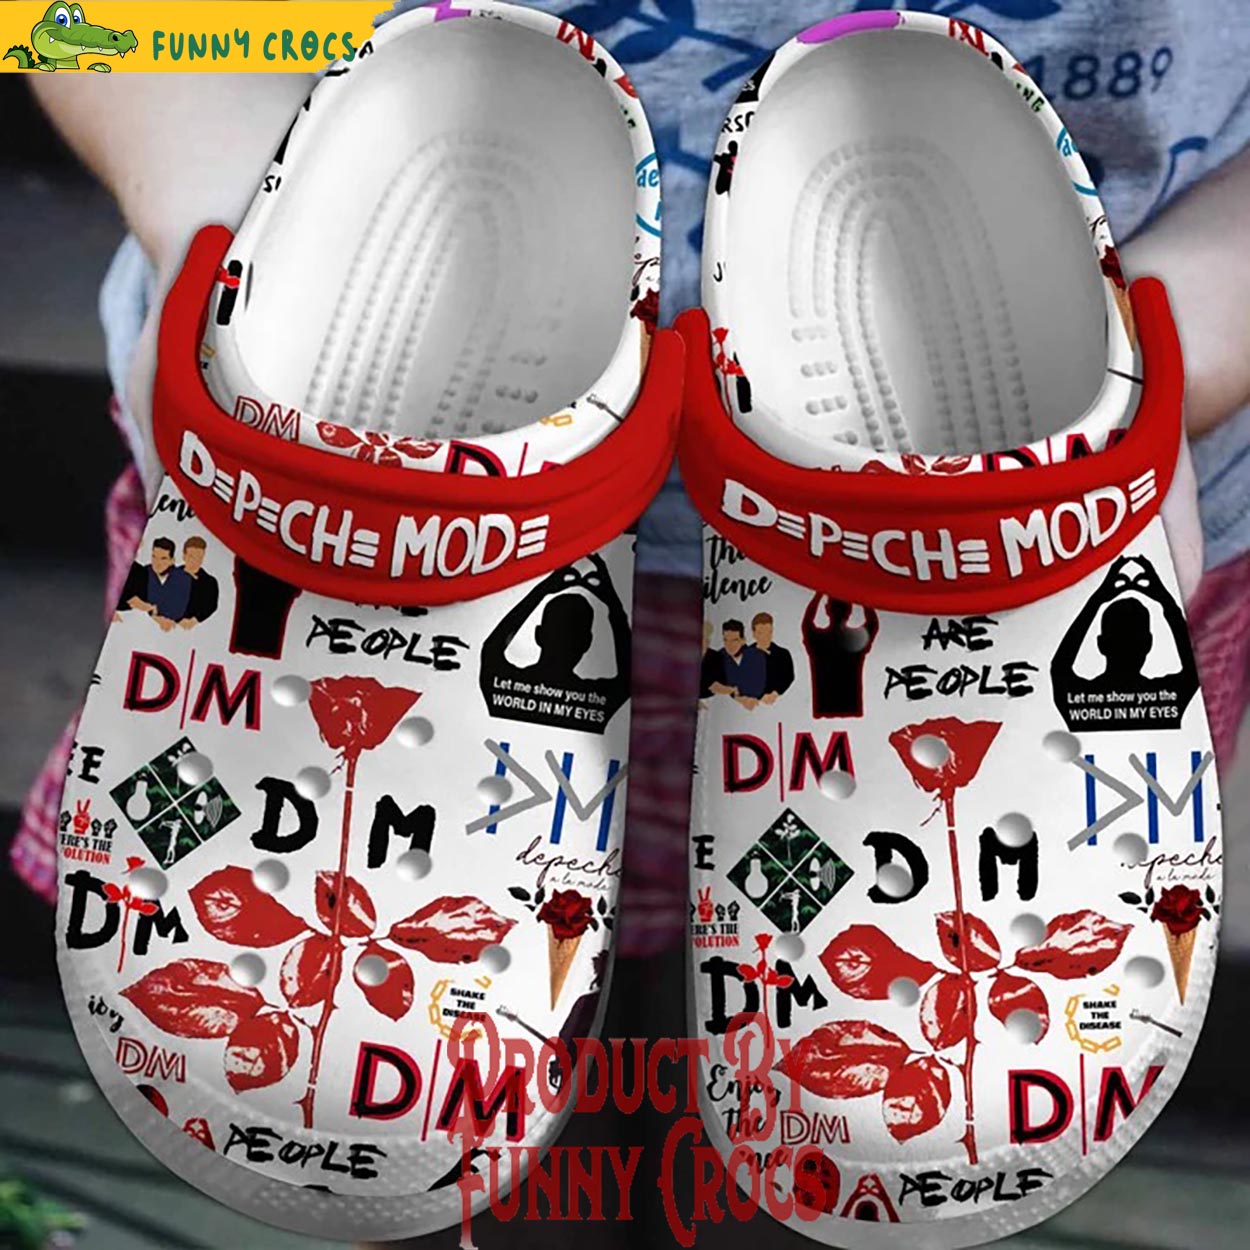 Depeche Mode People Are People Crocs Shoes - Discover Comfort And Style ...